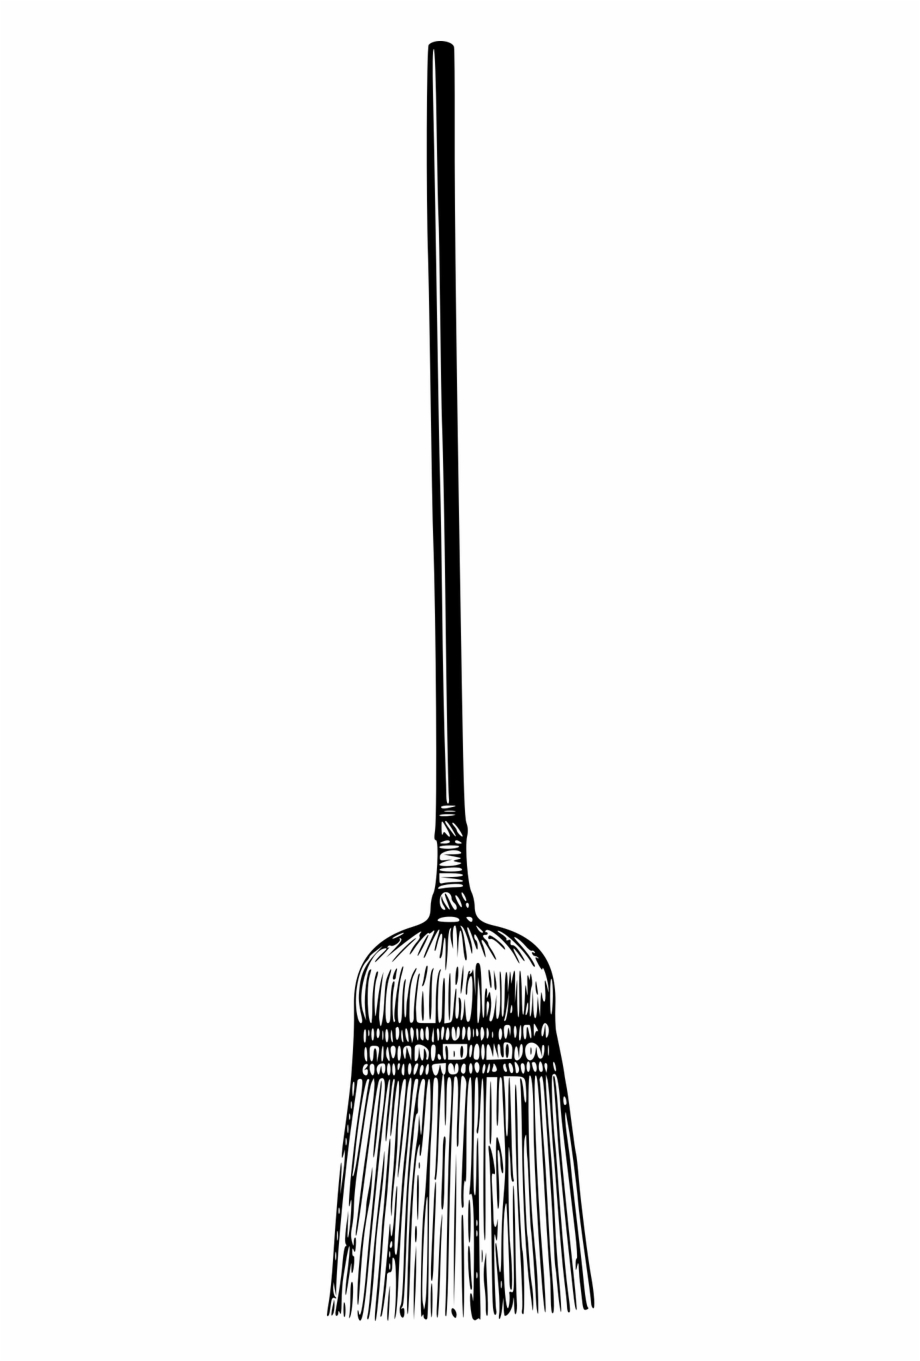 Broom Brush Cleaning Sweep Tool Png Image Ceiling